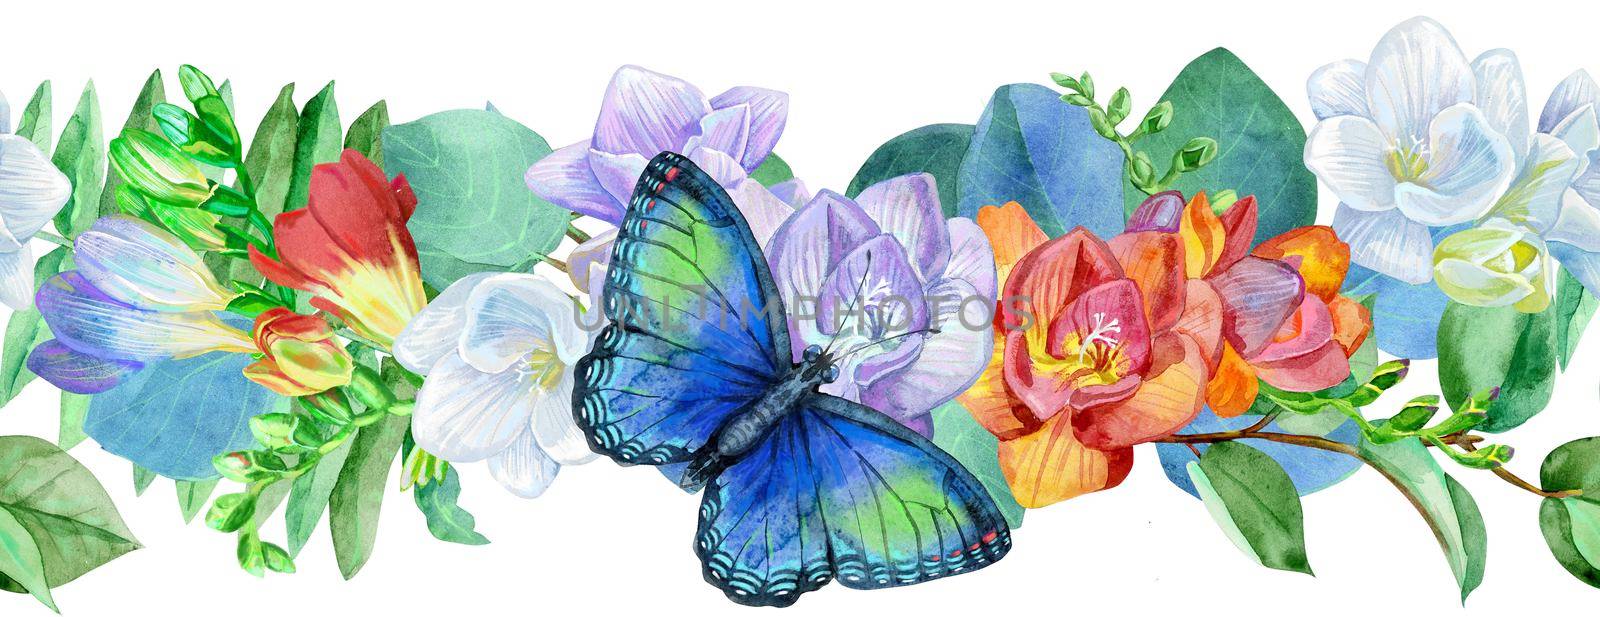 Seamless floral border with blue butterfly and freesia on white background by NataOmsk